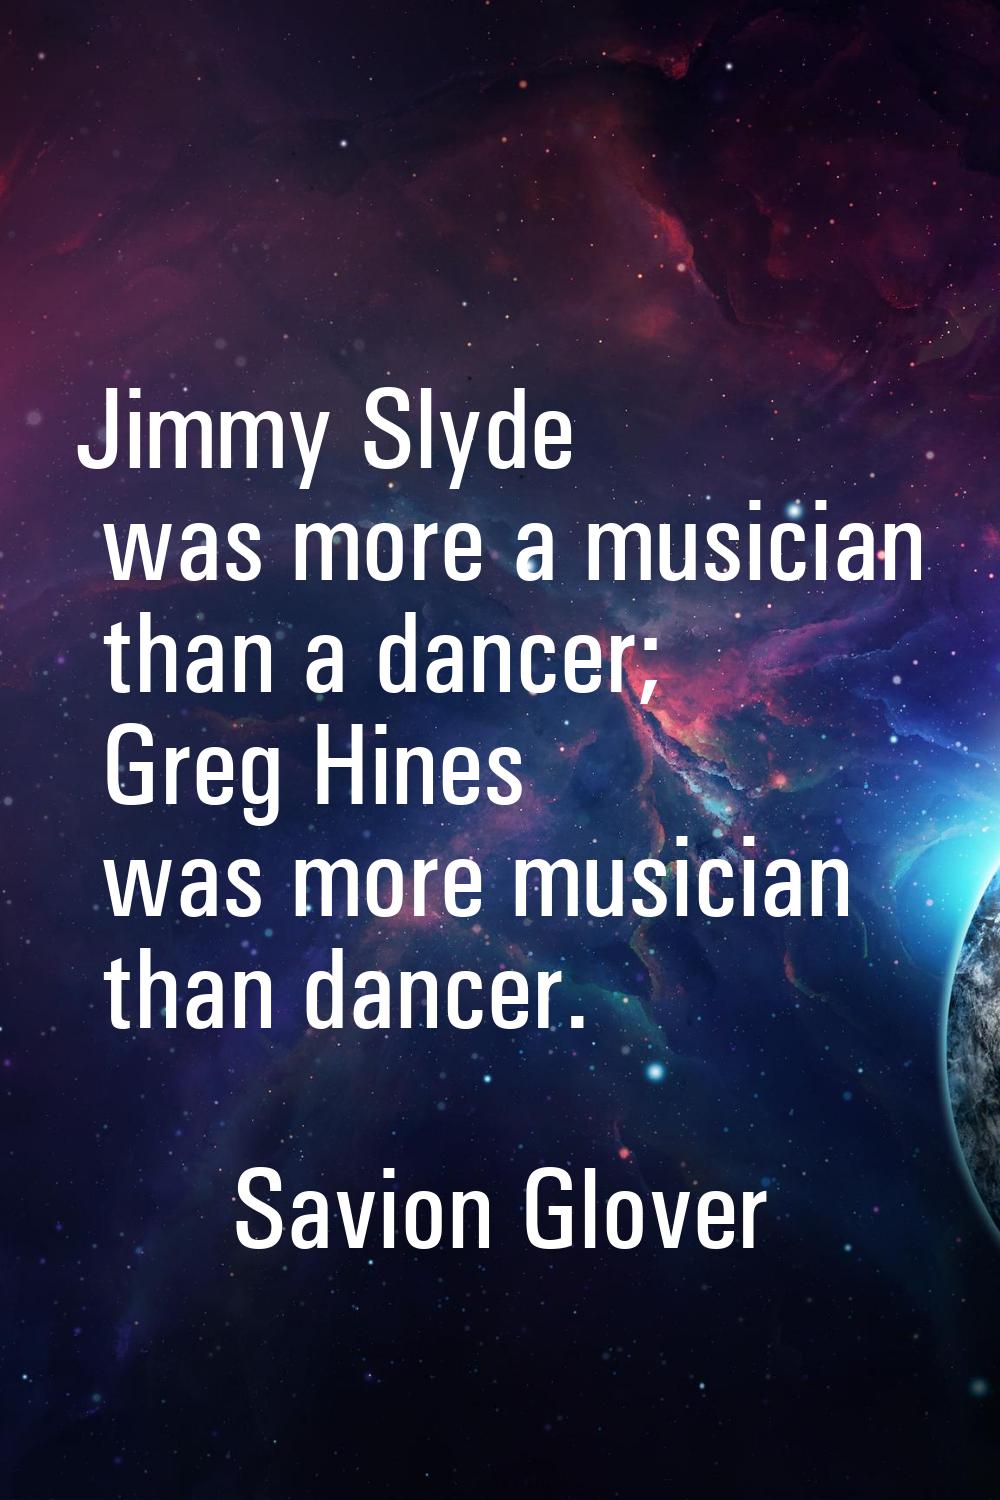 Jimmy Slyde was more a musician than a dancer; Greg Hines was more musician than dancer.